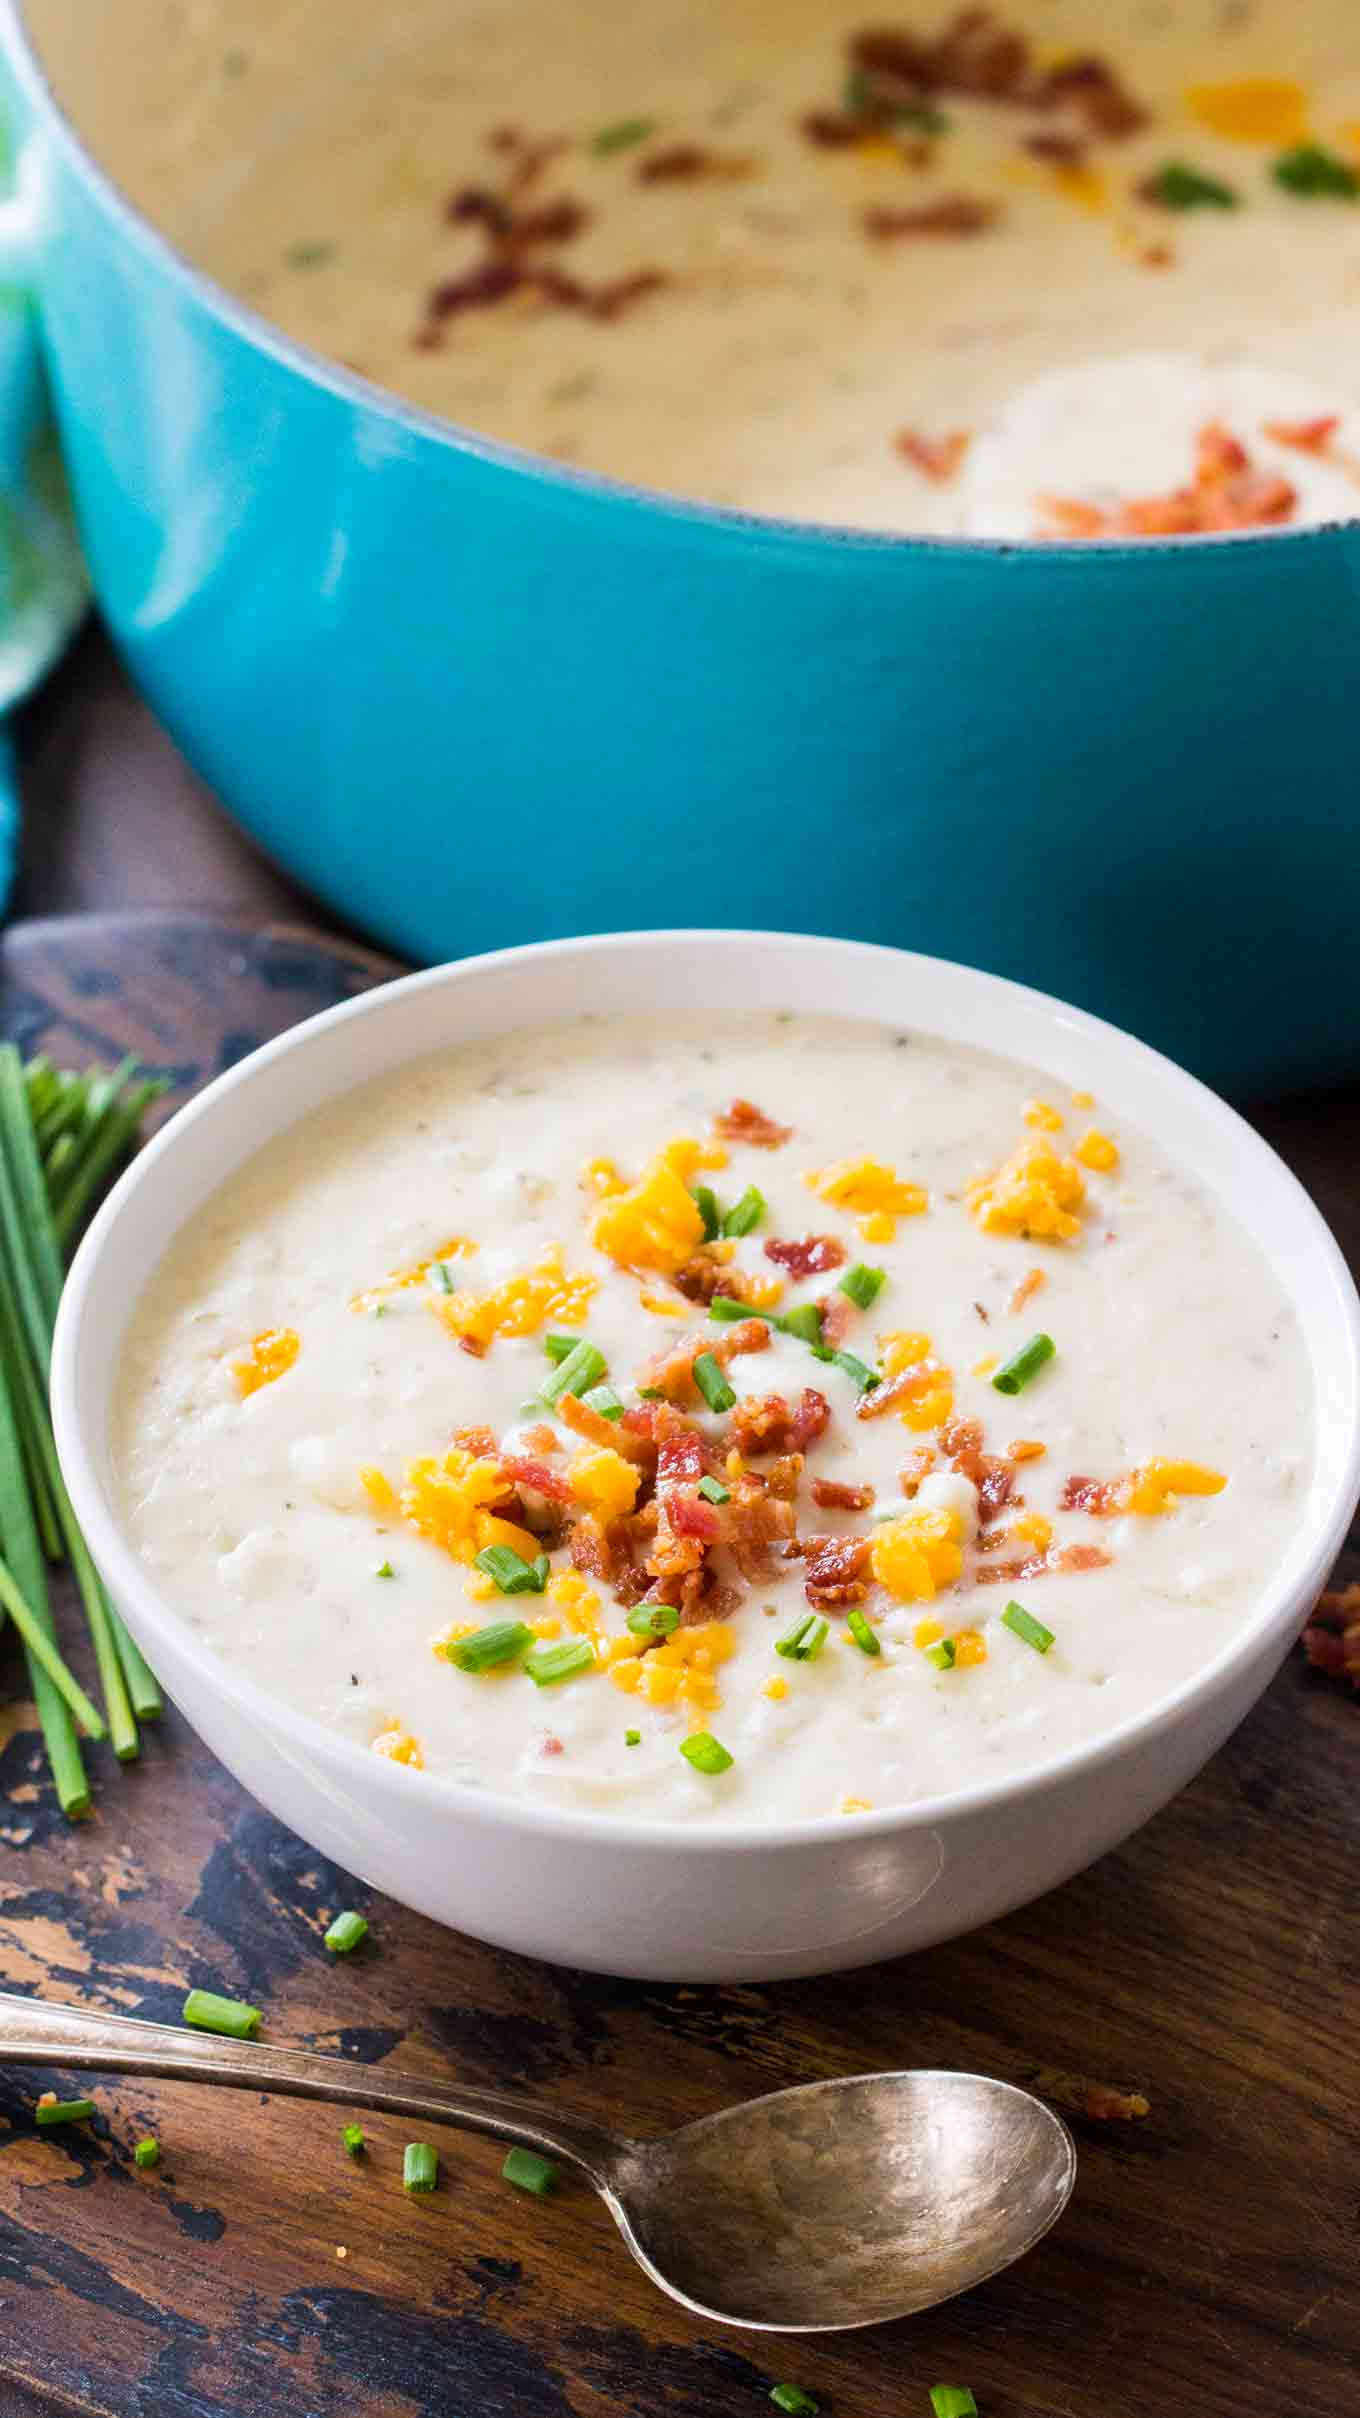 Panera Bread Soups Copycat recipe for their Panera Bread Baked Potato Soup. The famous chain's comforting soup made easy at home. Serve topped with bacon, chives, cheddar cheese and sour cream.